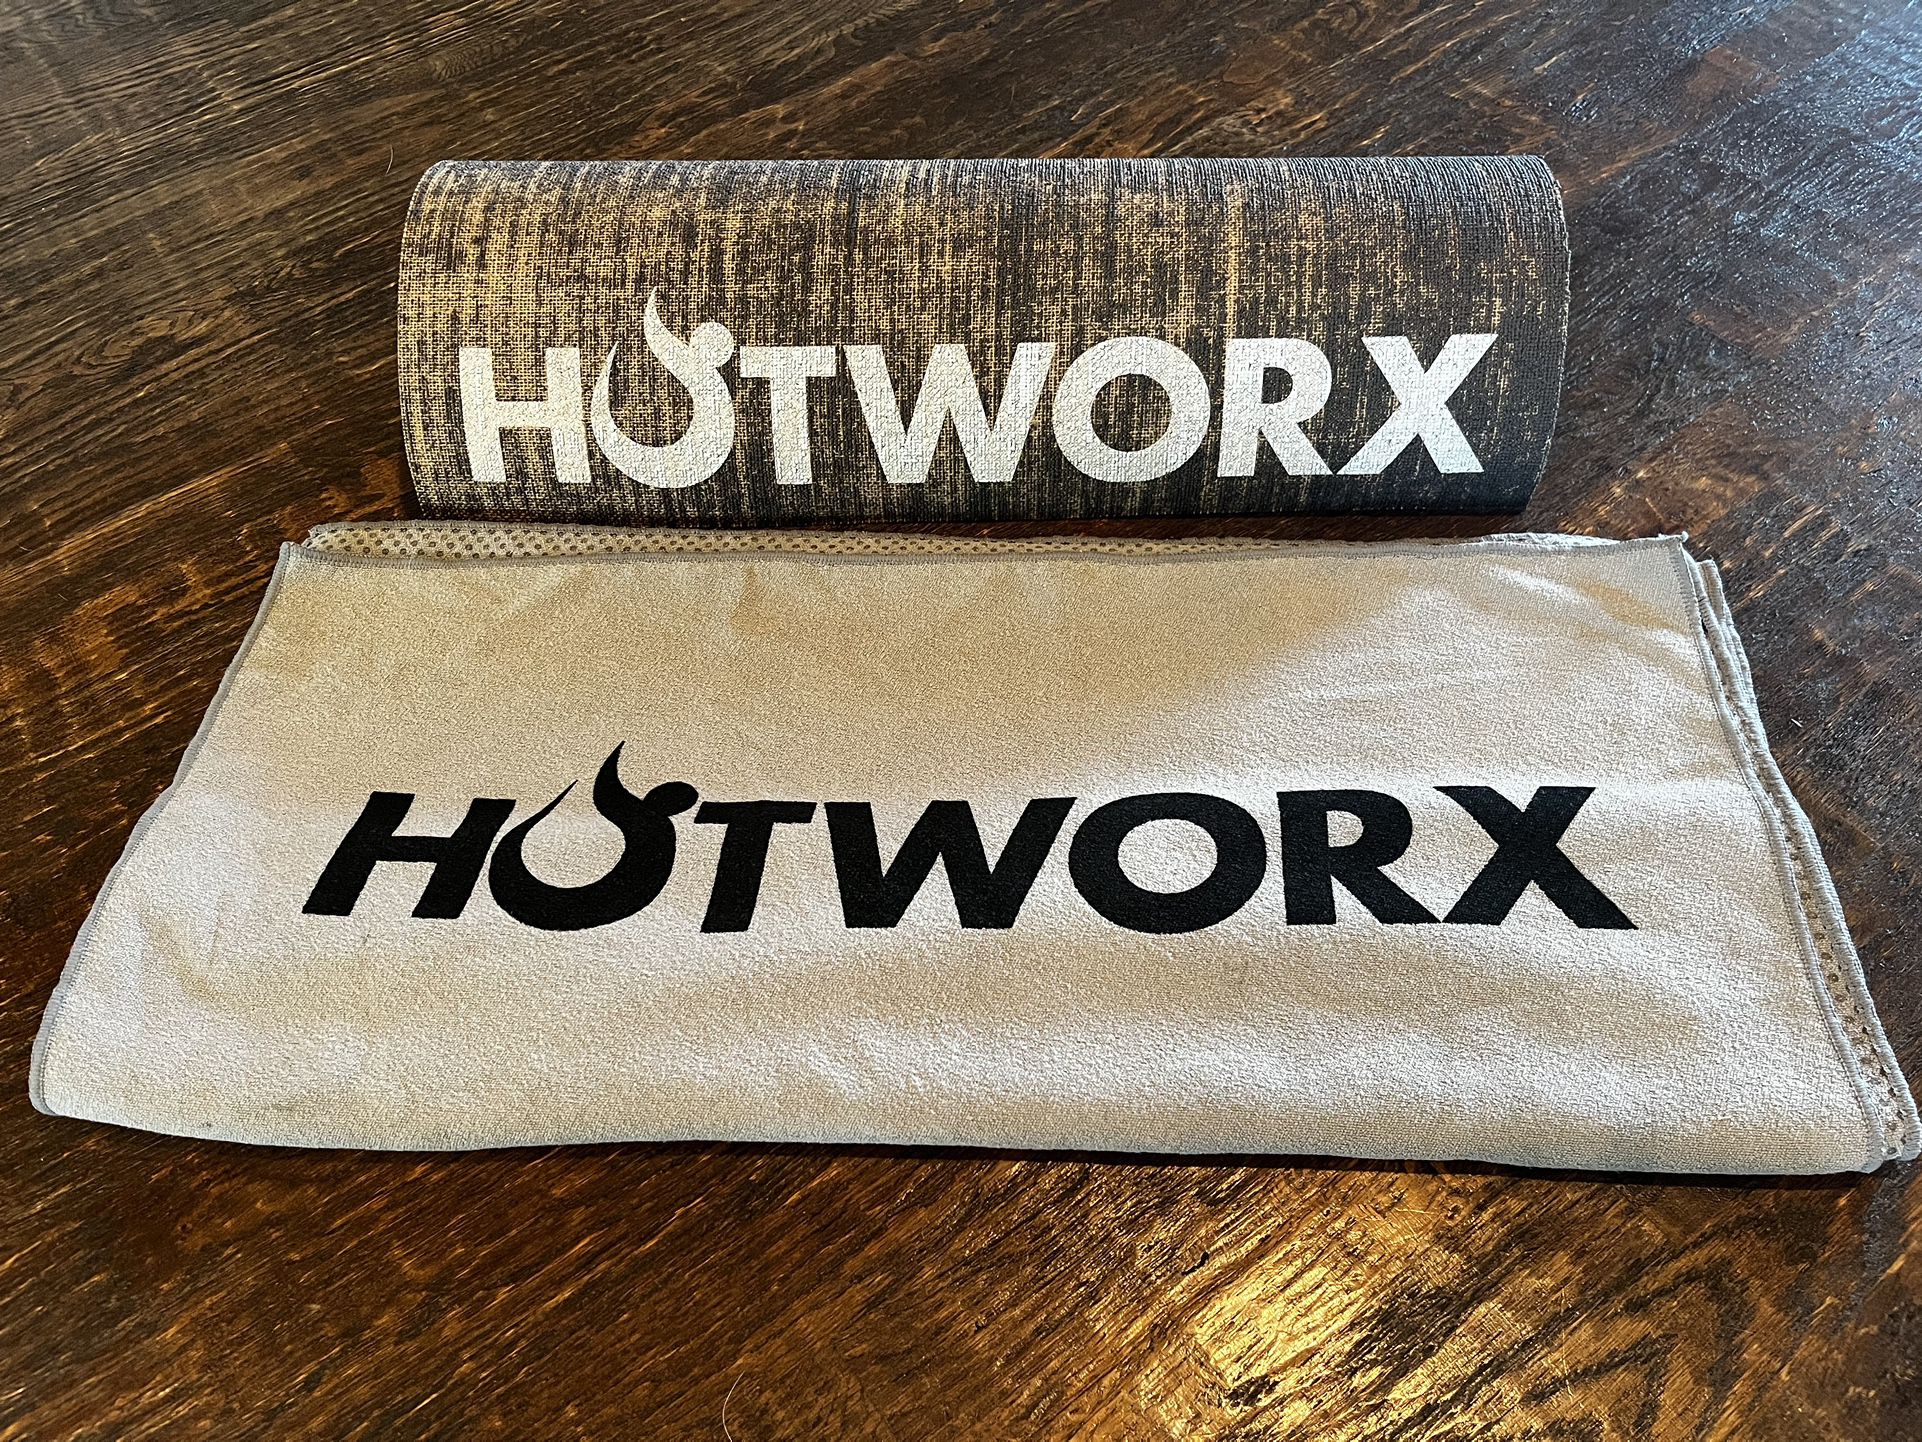 HotWorx Yoga Mat & Towel for Sale in Fairview, TX - OfferUp